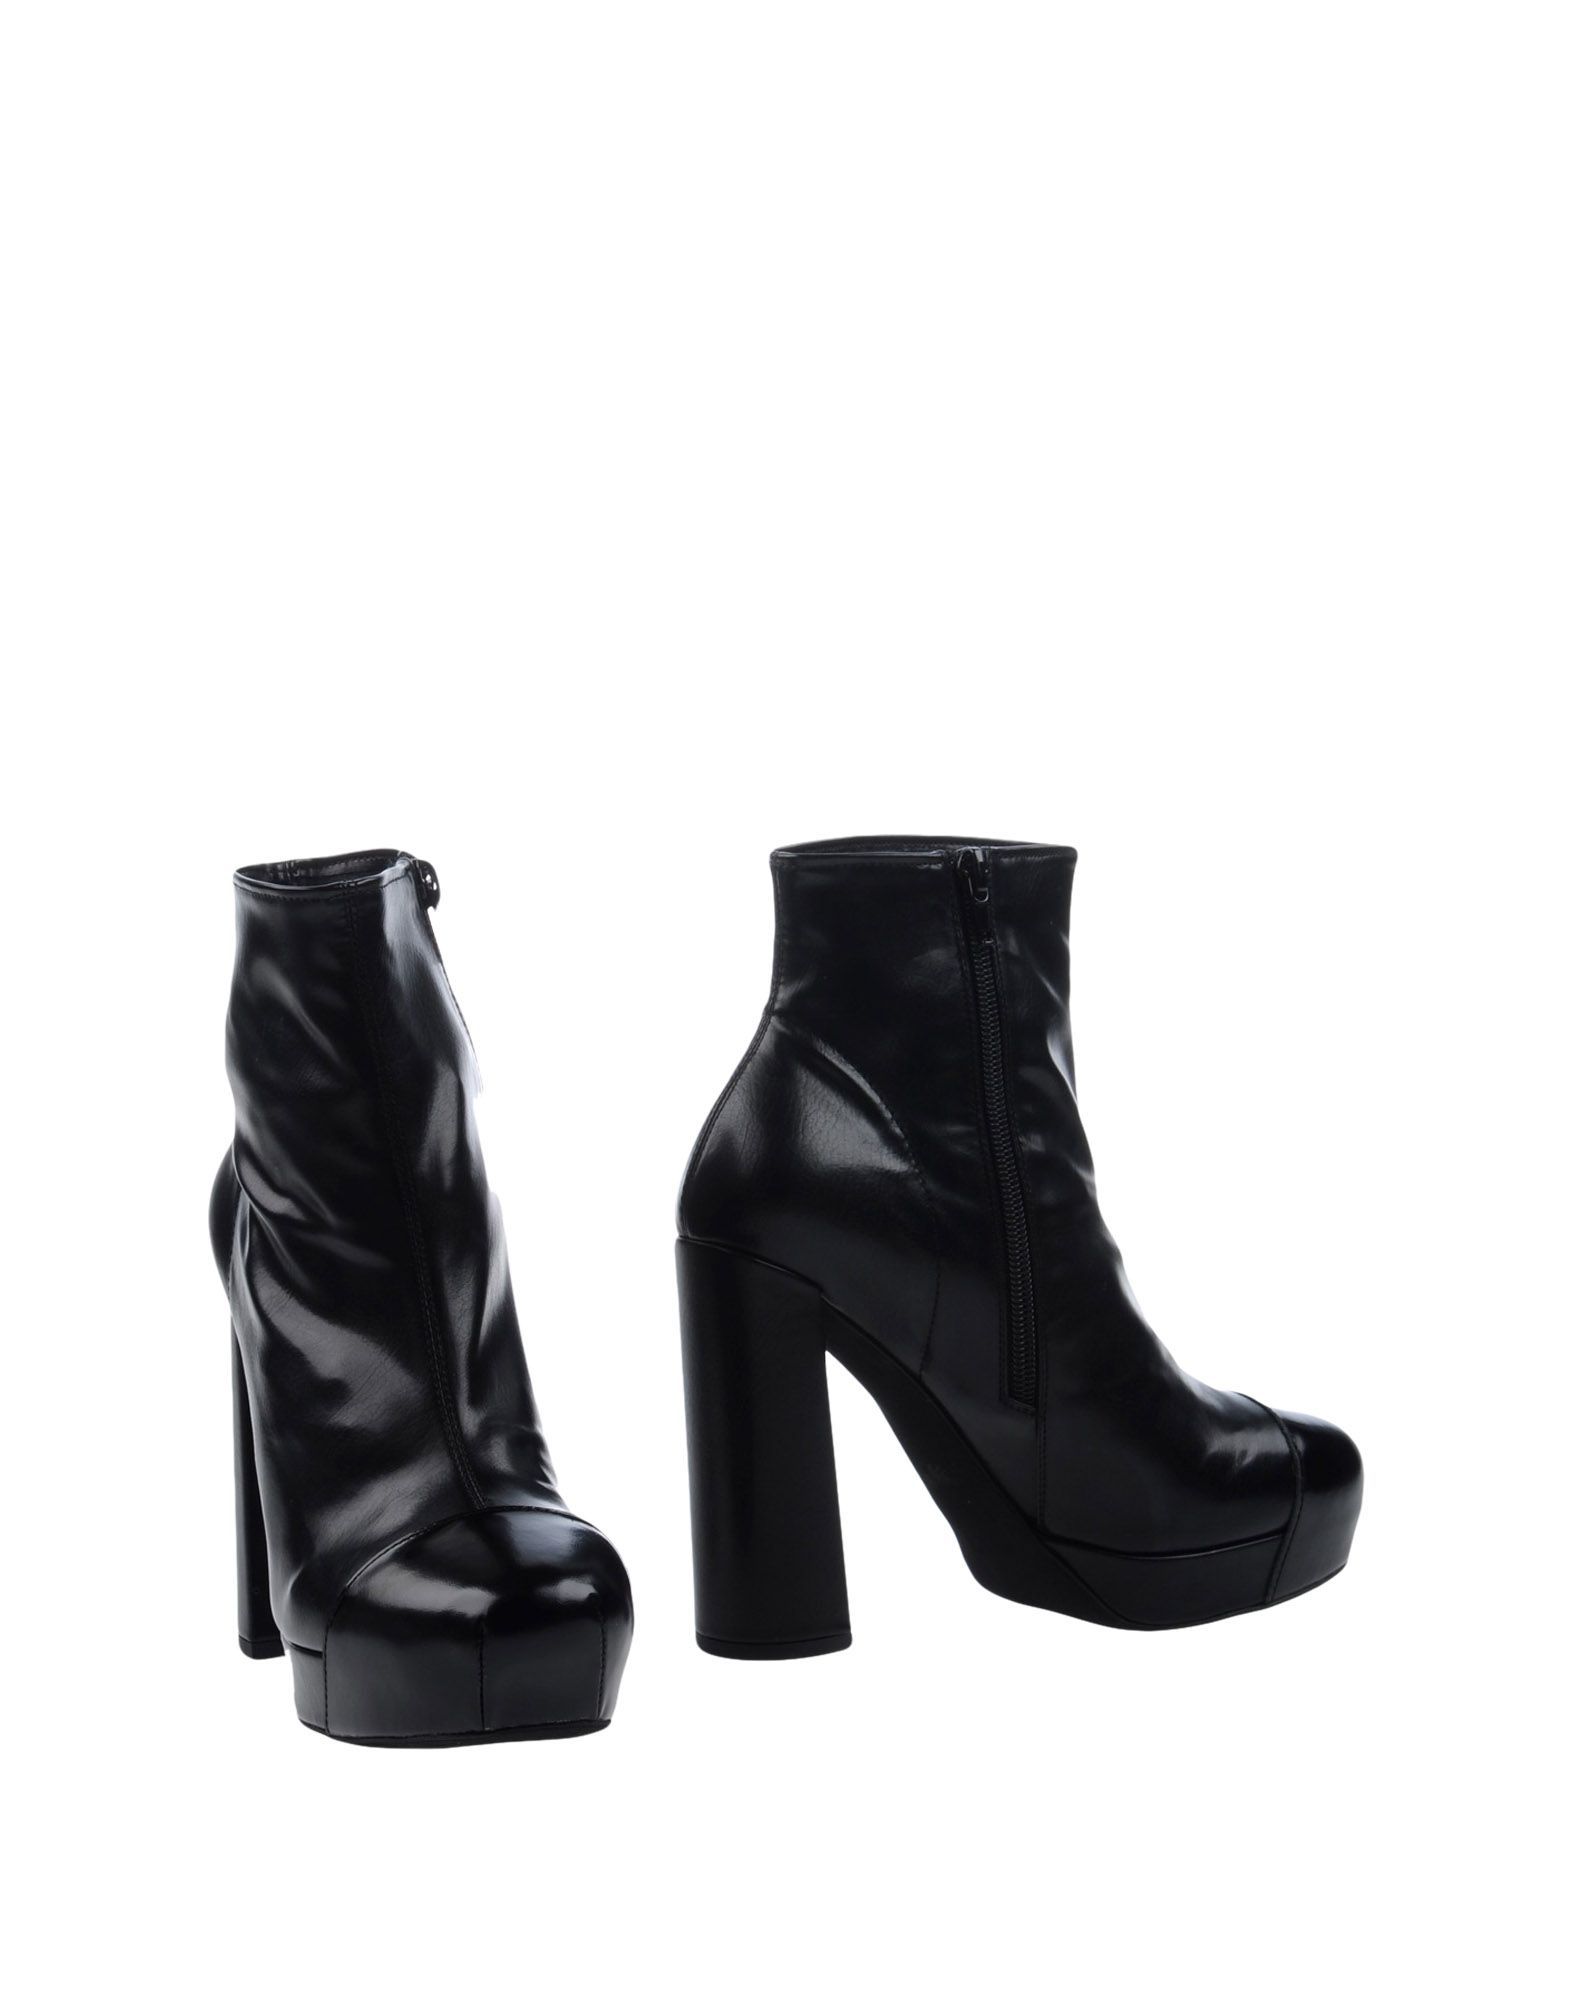 JEFFREY CAMPBELL Ankle boots | YOOX (US)